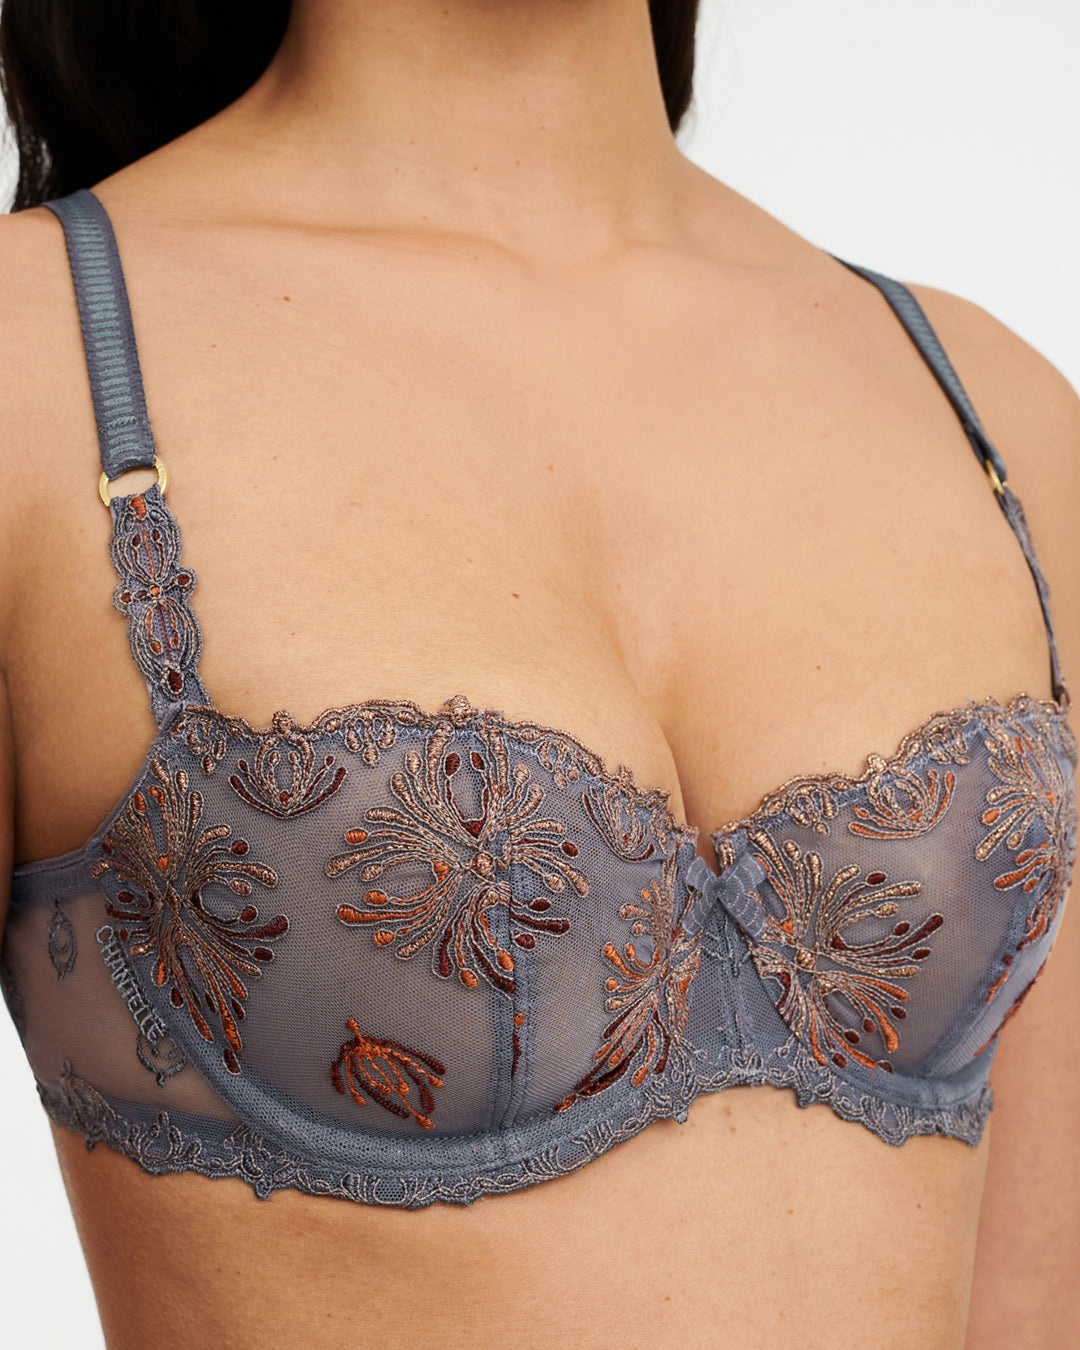 Opera by Chantelle, a delicate levers lace half cup bra is